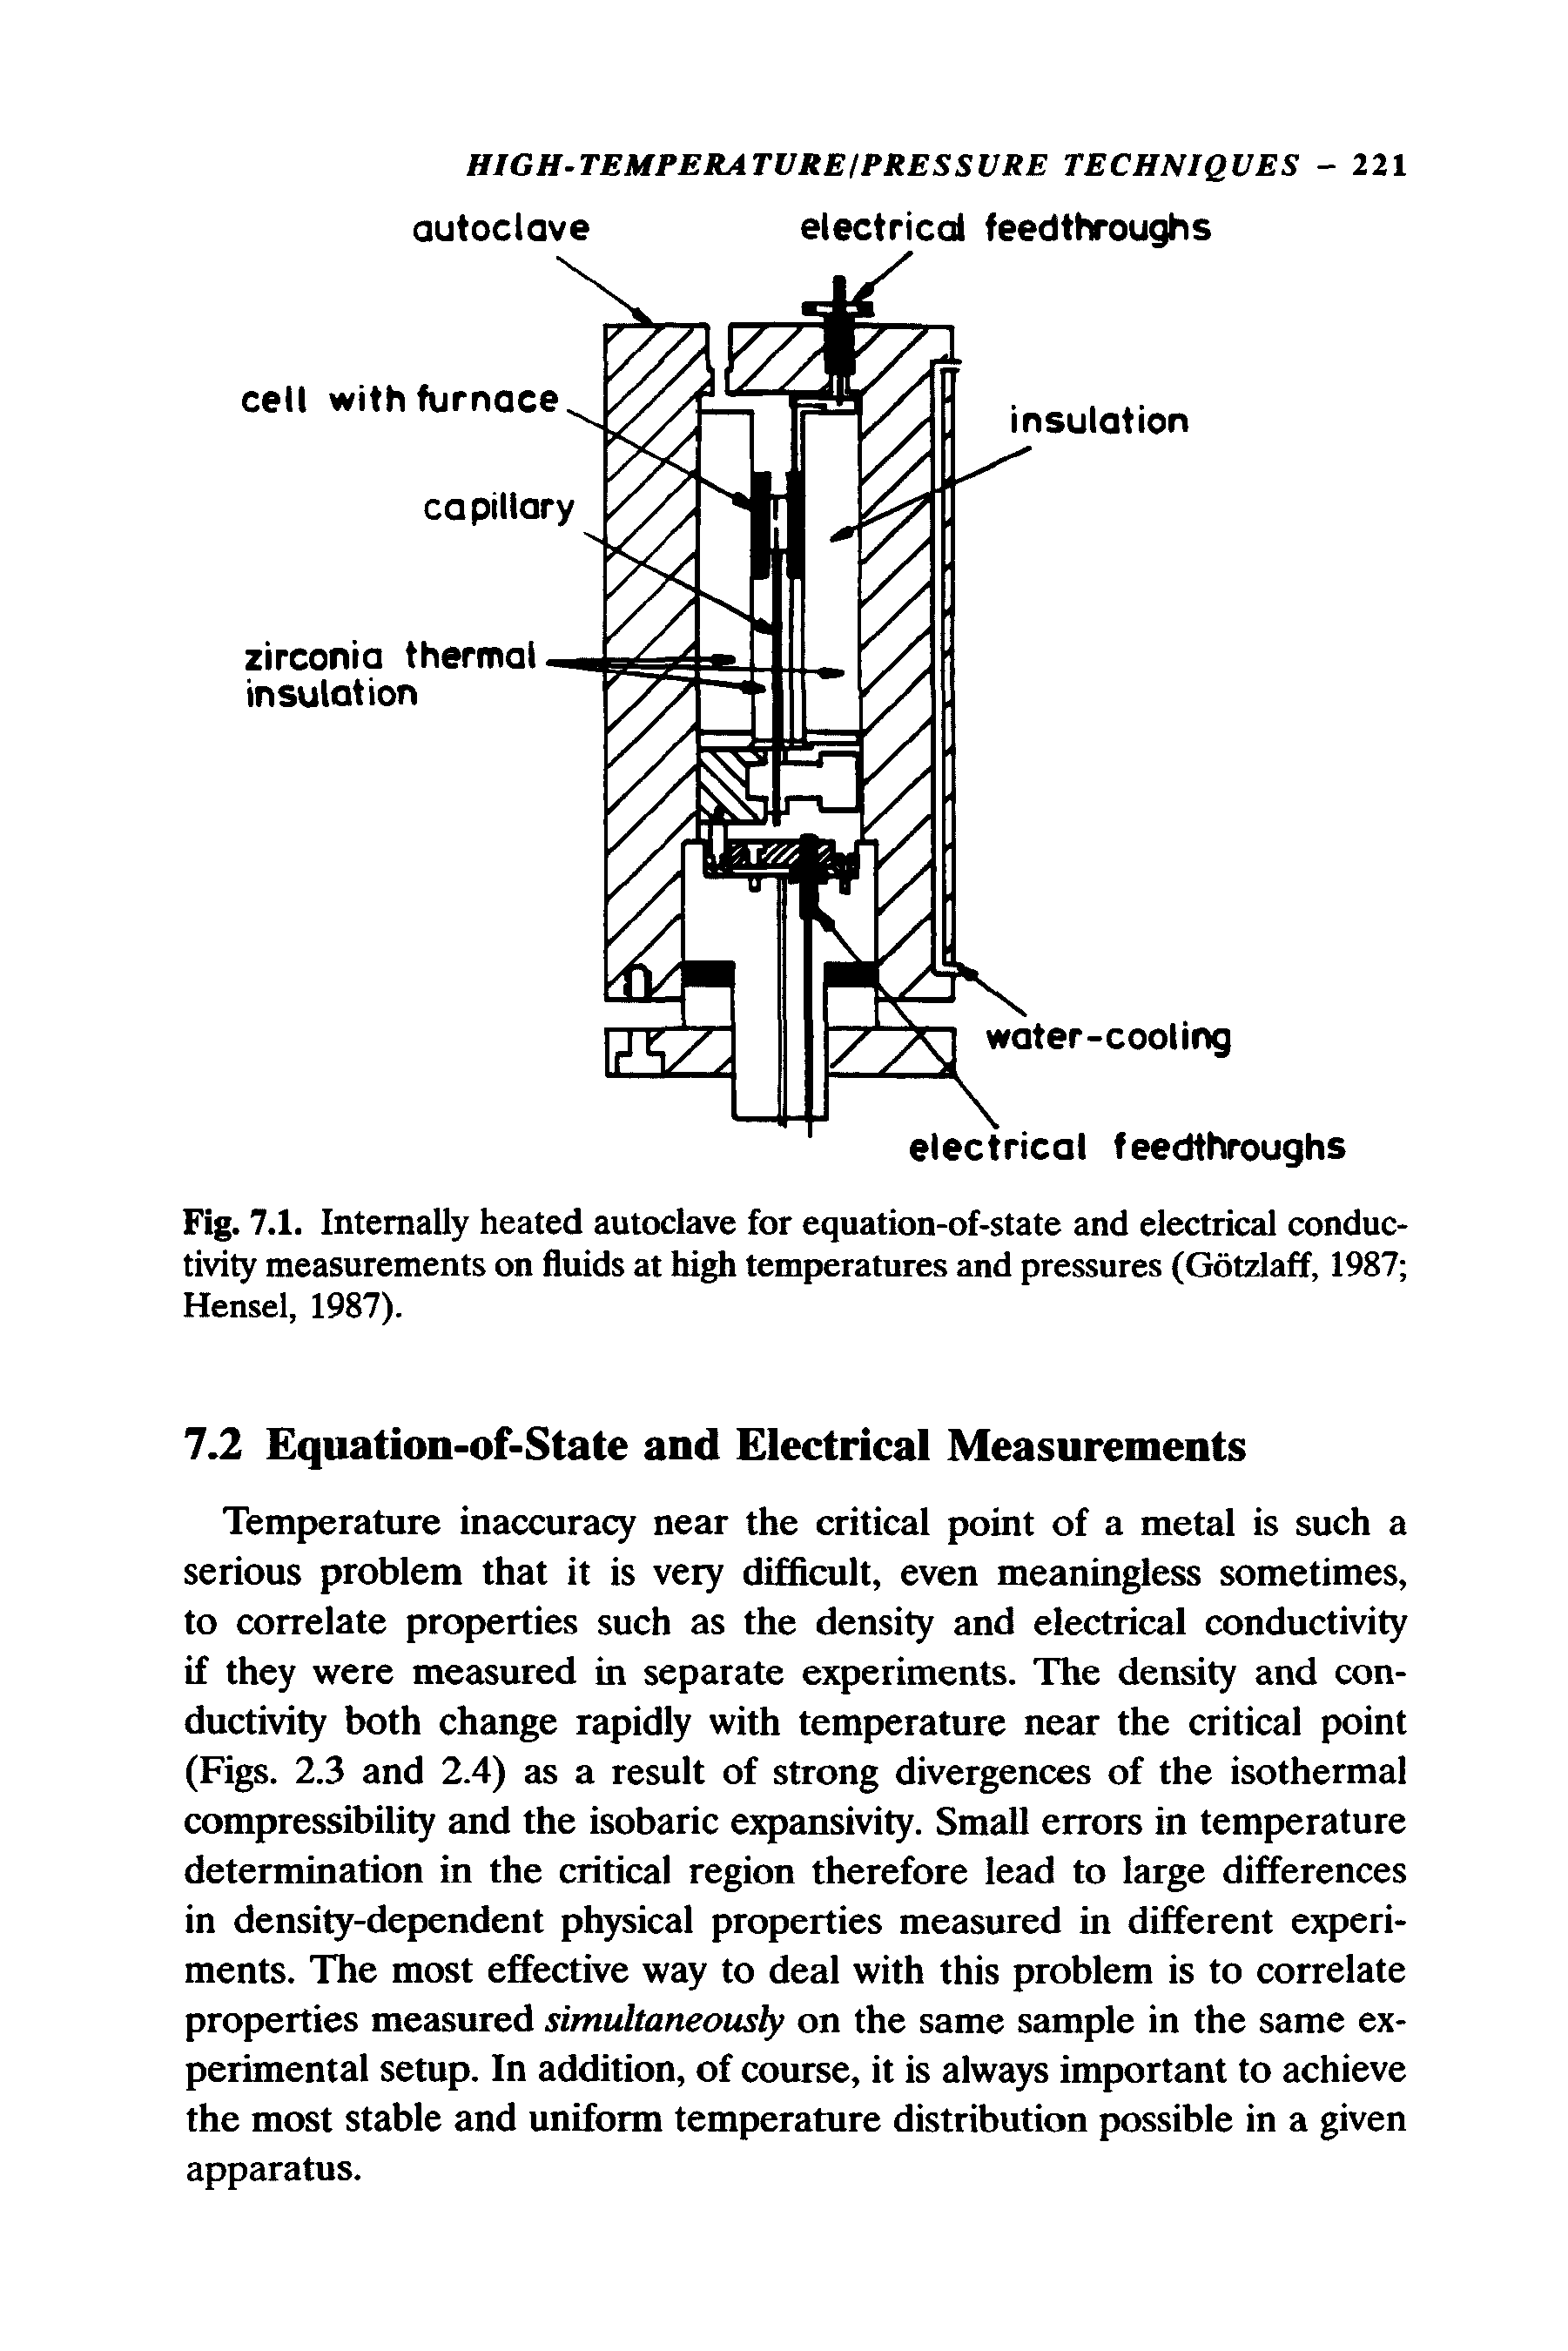 Fig. 7.1. Internally heated autoclave for equation-of-state and electrical conductivity measurements on fluids at high temperatures and pressures (Gotzlaff, 1987 Hensel, 1987).